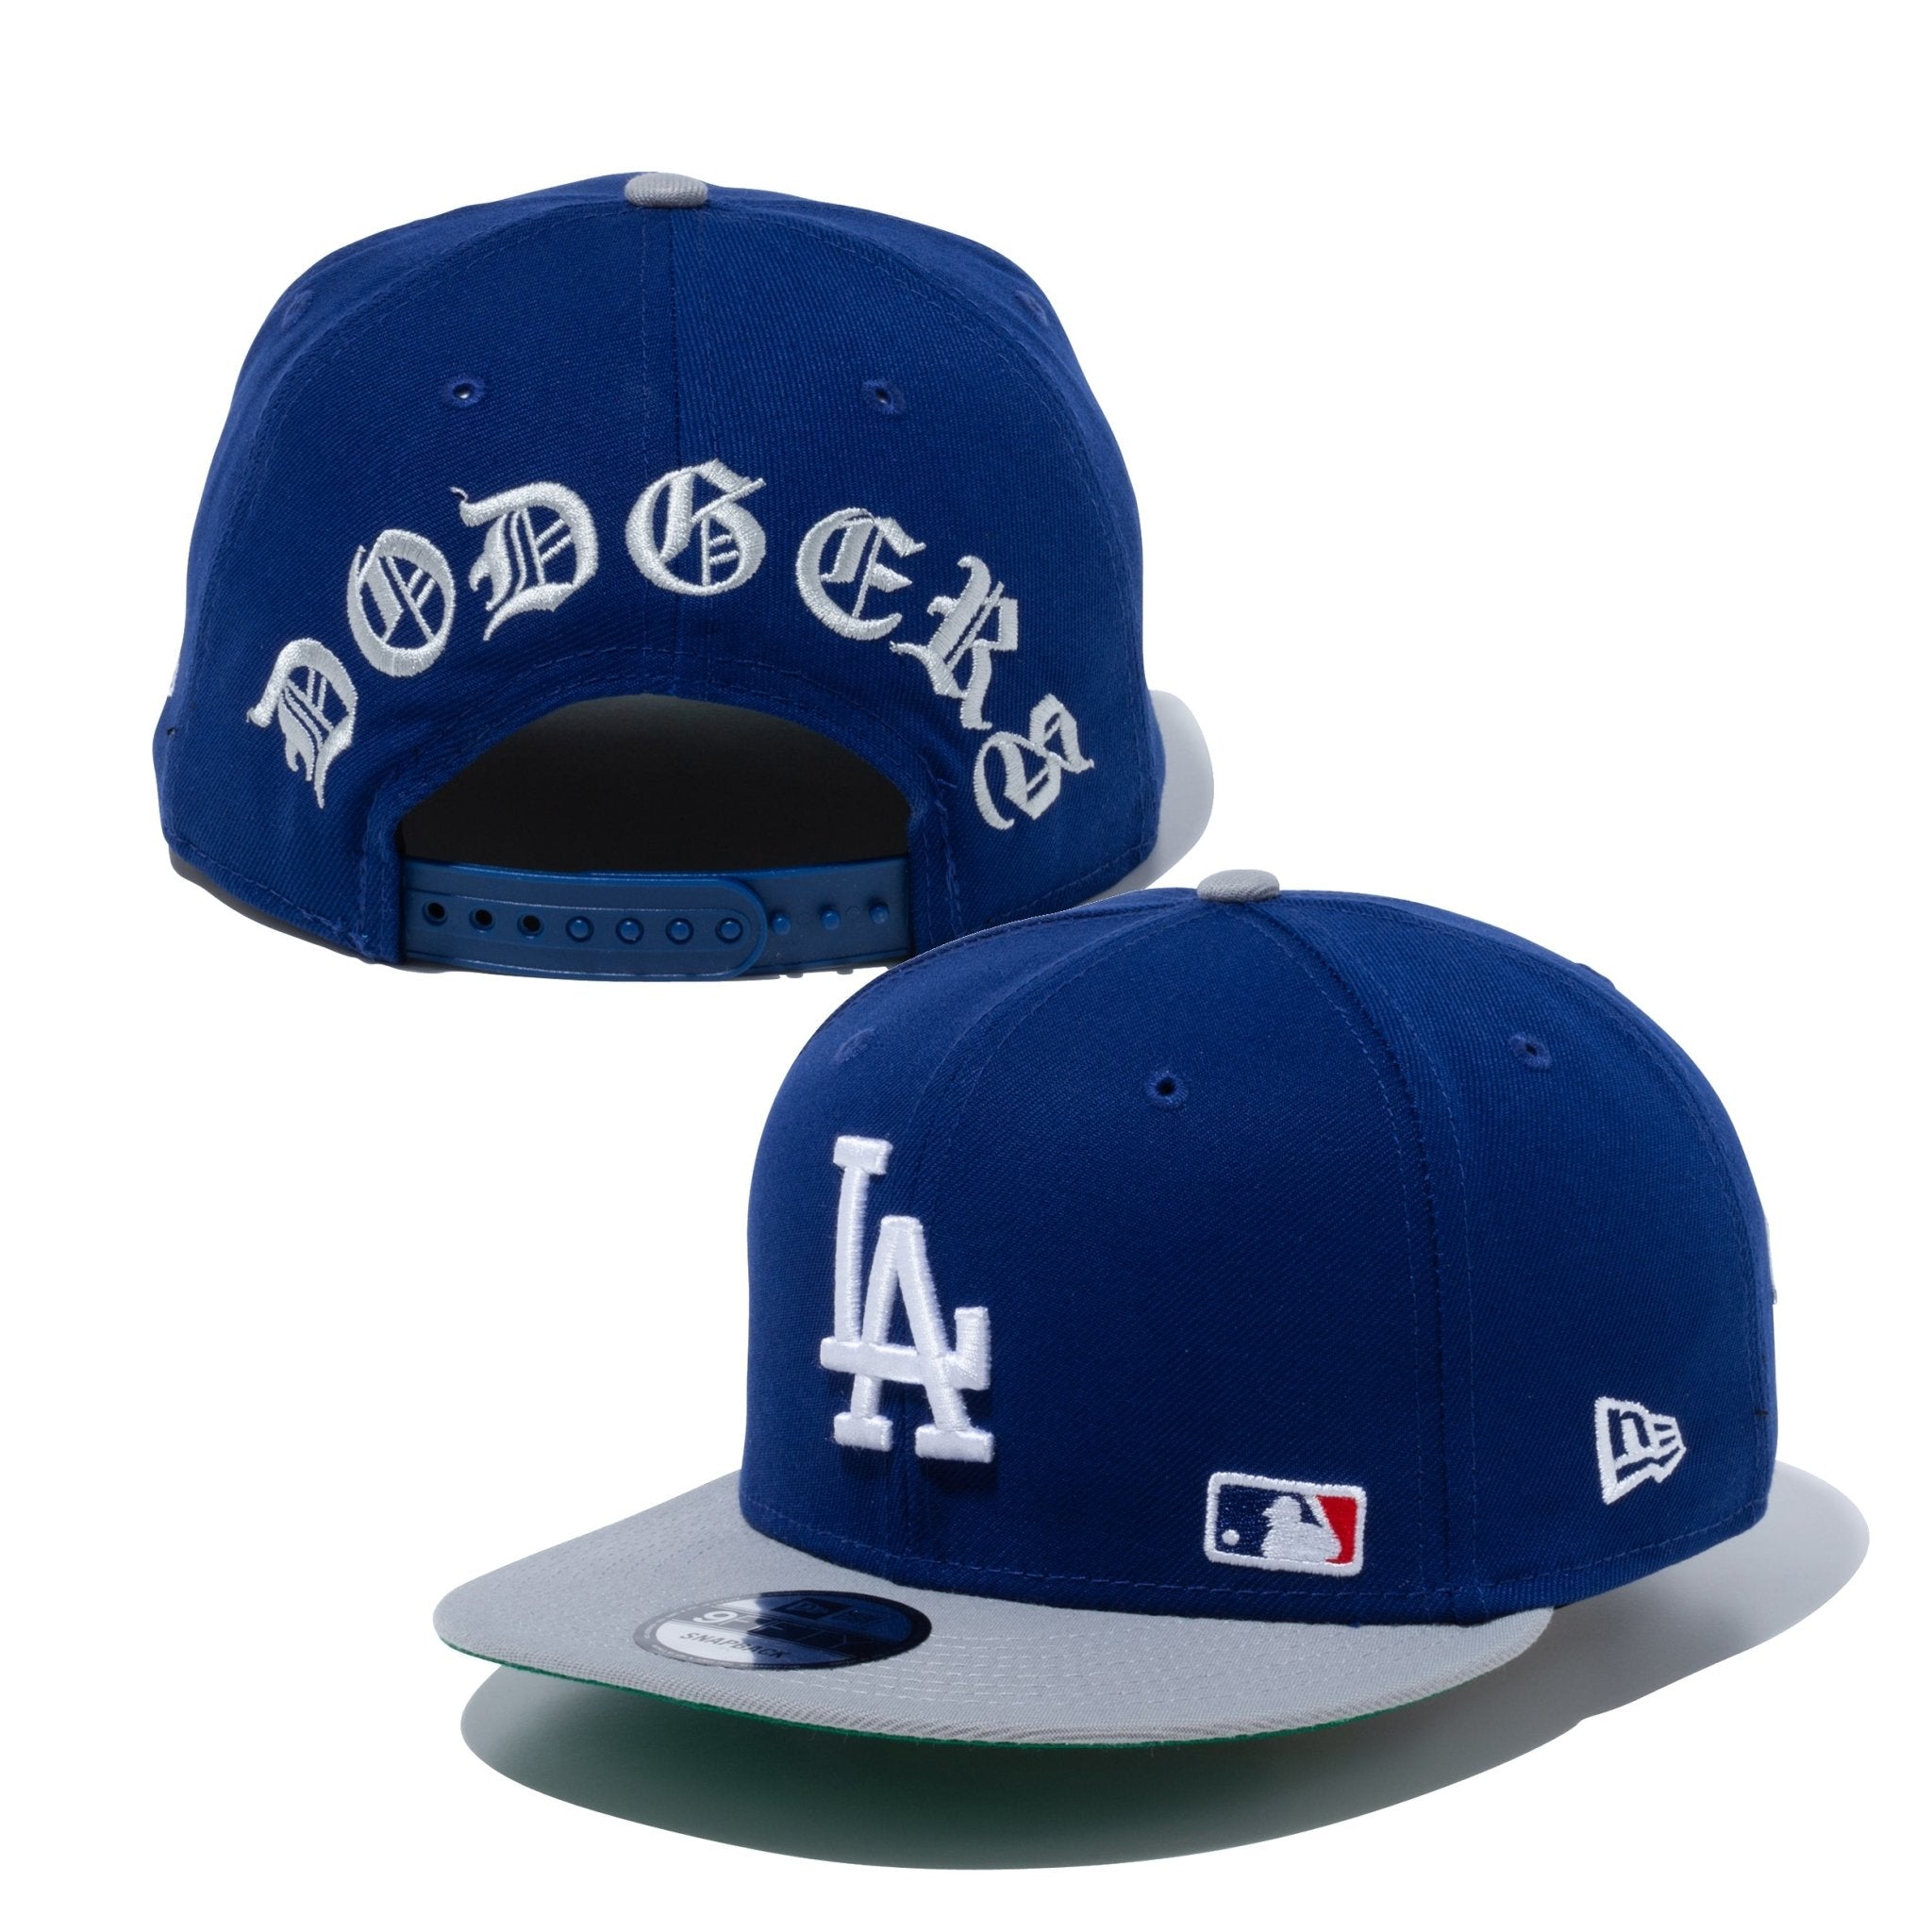 9FIFTY BLACK LETTER ARCH ロサンゼルス・ドジャース 